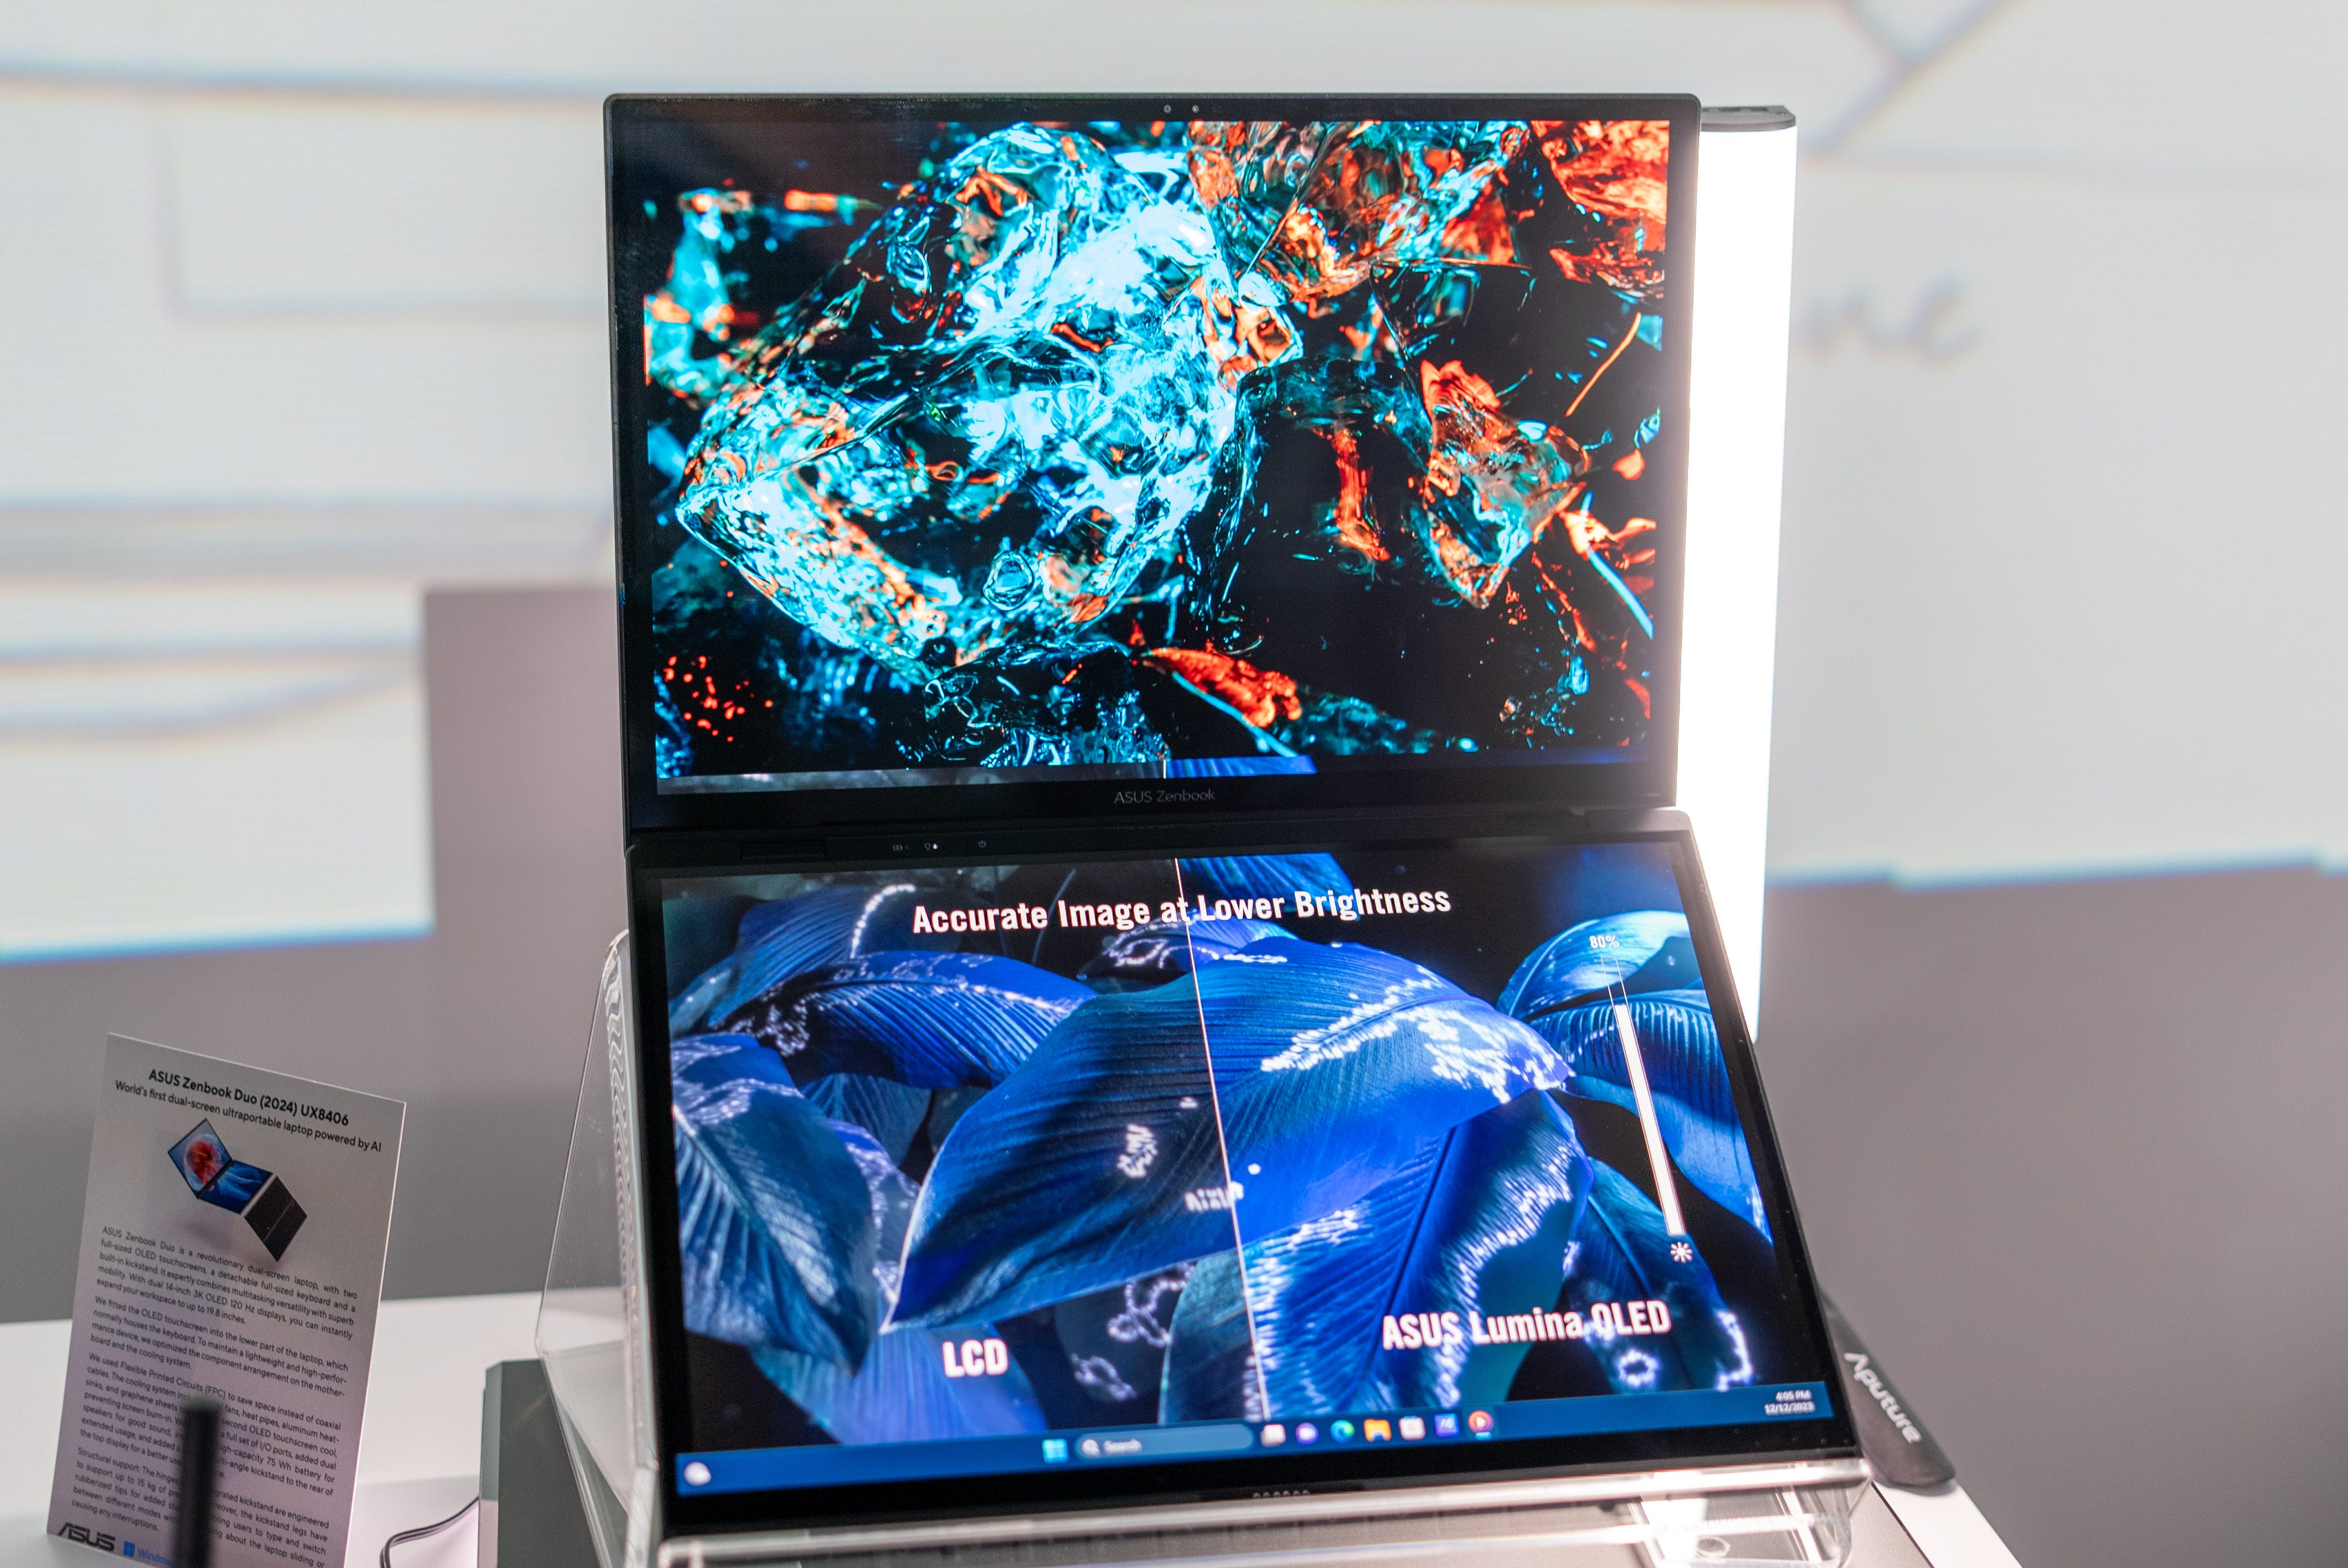 The Asus ZenBook Duo is the greatest dual screen laptop I've used